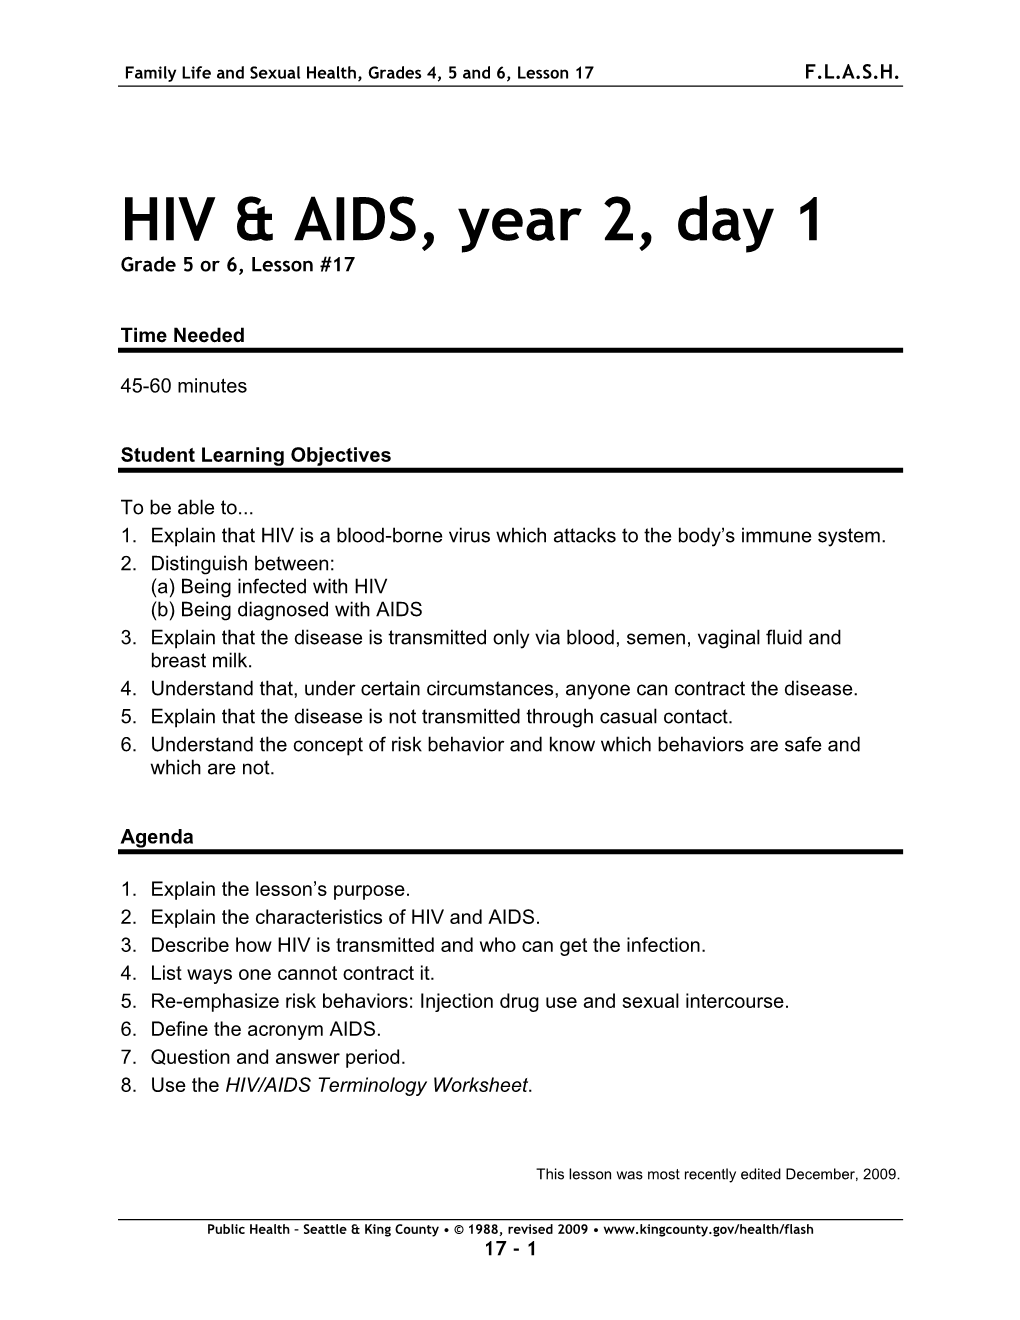 HIV & AIDS, Year 2, Day 1